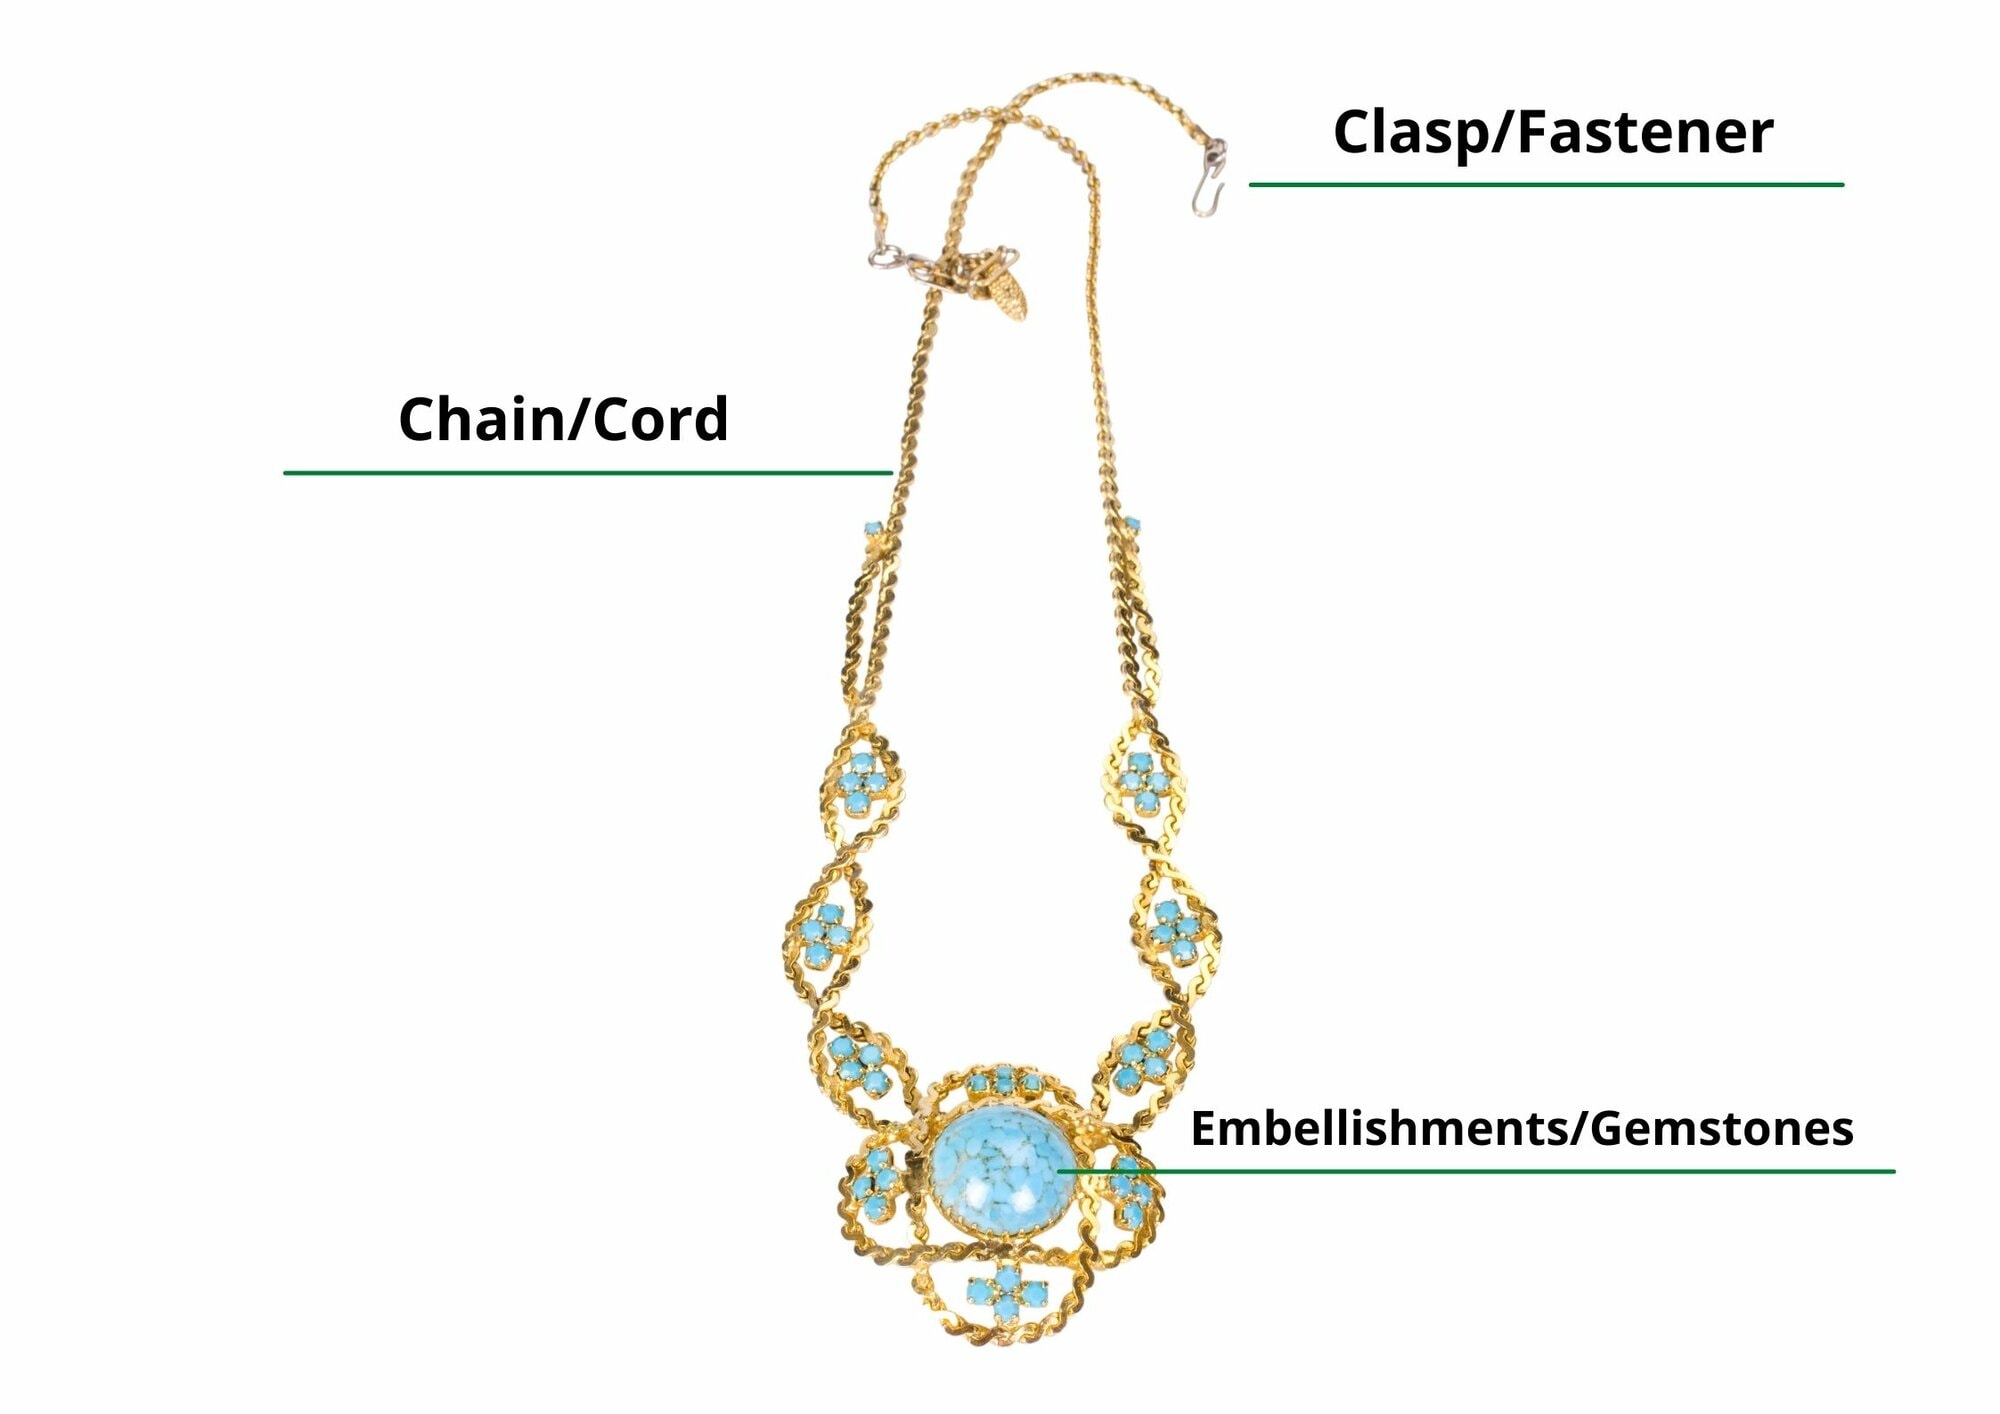 Necklace Anatomy 101: Understanding the Parts of a Necklace